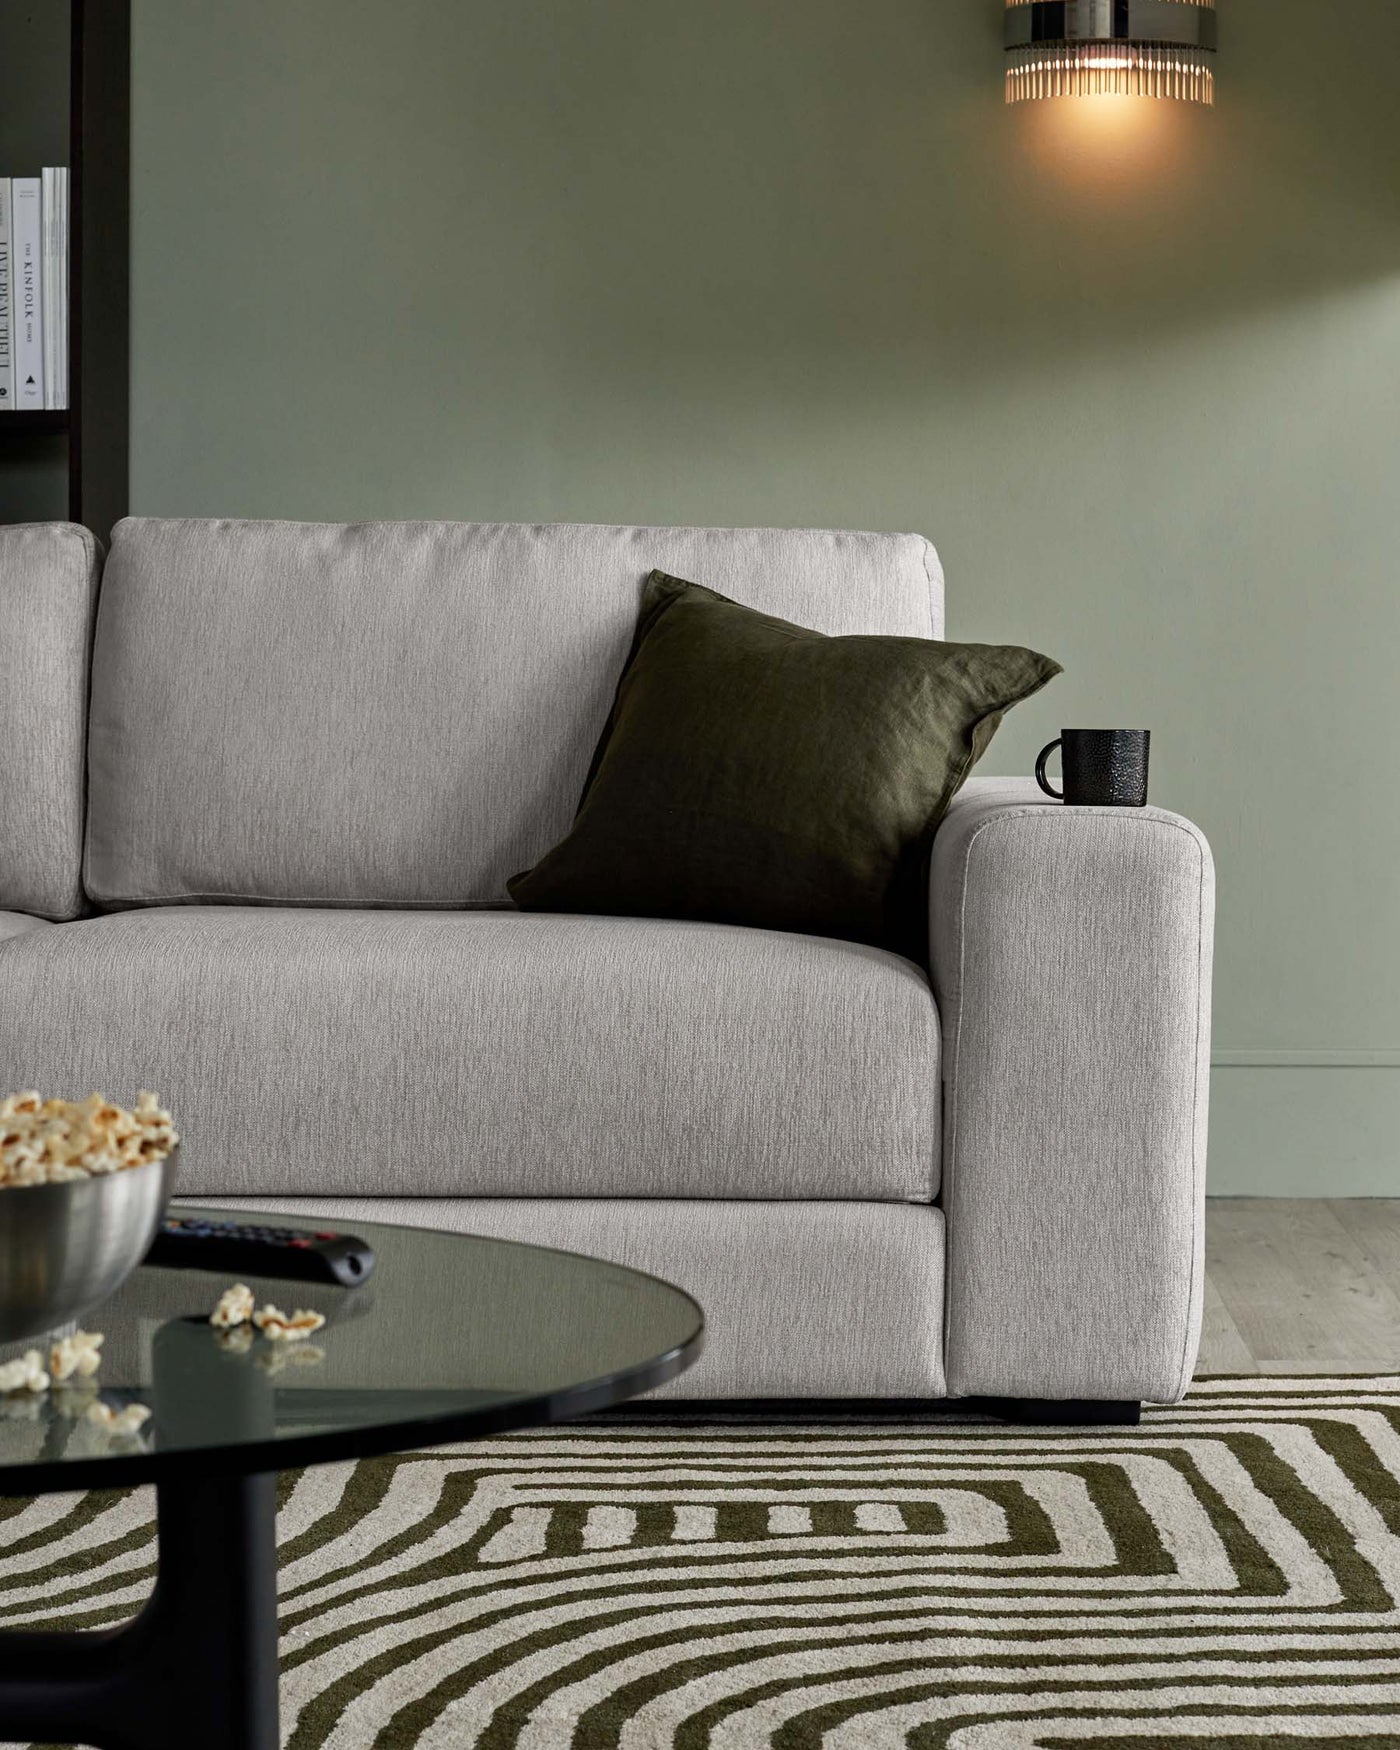 Contemporary light grey fabric sofa with clean lines and subtle texture. Features plush cushions, one dark olive green decorative pillow, and a flat, wide armrest on the left side. In front of it, a round, black matte coffee table with a smoked glass top, hosting a metallic bowl with popcorn and a remote control, placed over a patterned cream and olive area rug. Behind the sofa, a modern wall lamp with a cylindrical shade provides soft lighting.